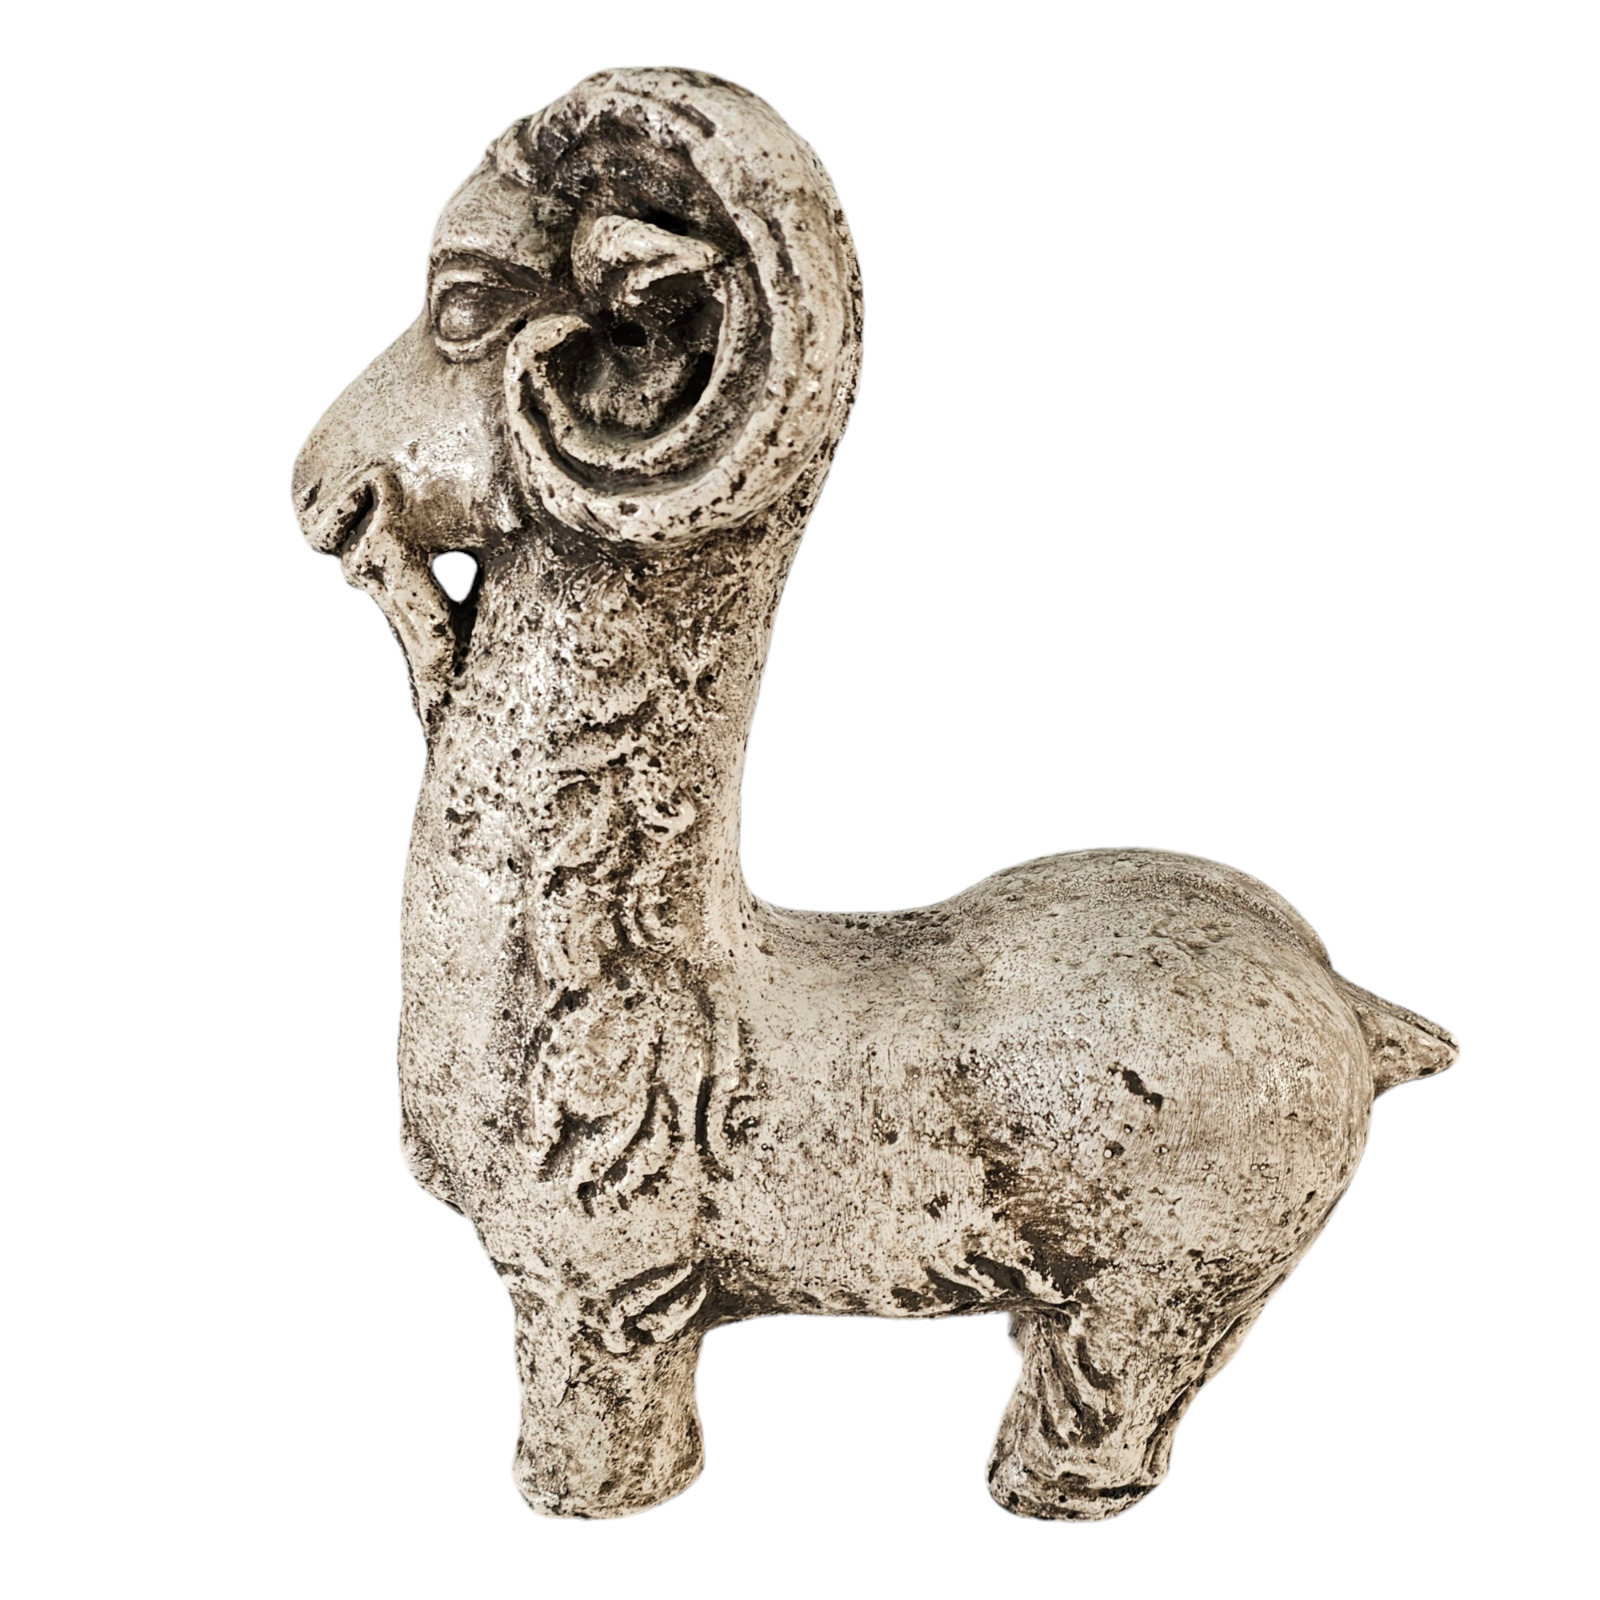 Long Neck Billy Goat Ram Sculpture Figurine Attributed To Austin Productions 16